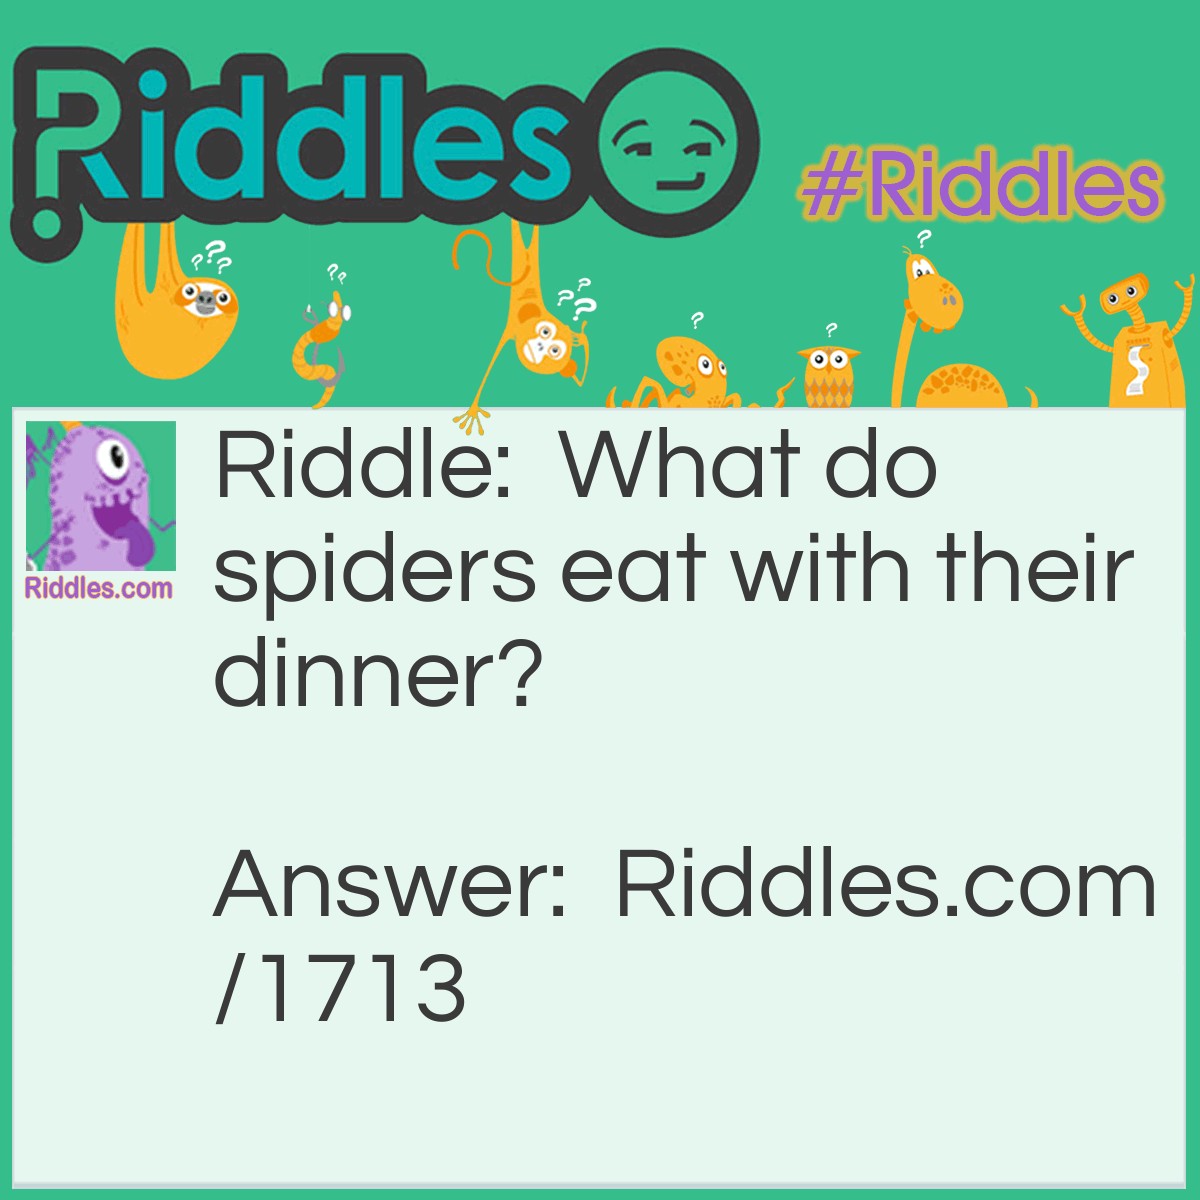 Riddle: What do spiders eat with their dinner? Answer: Corn on the cobweb.